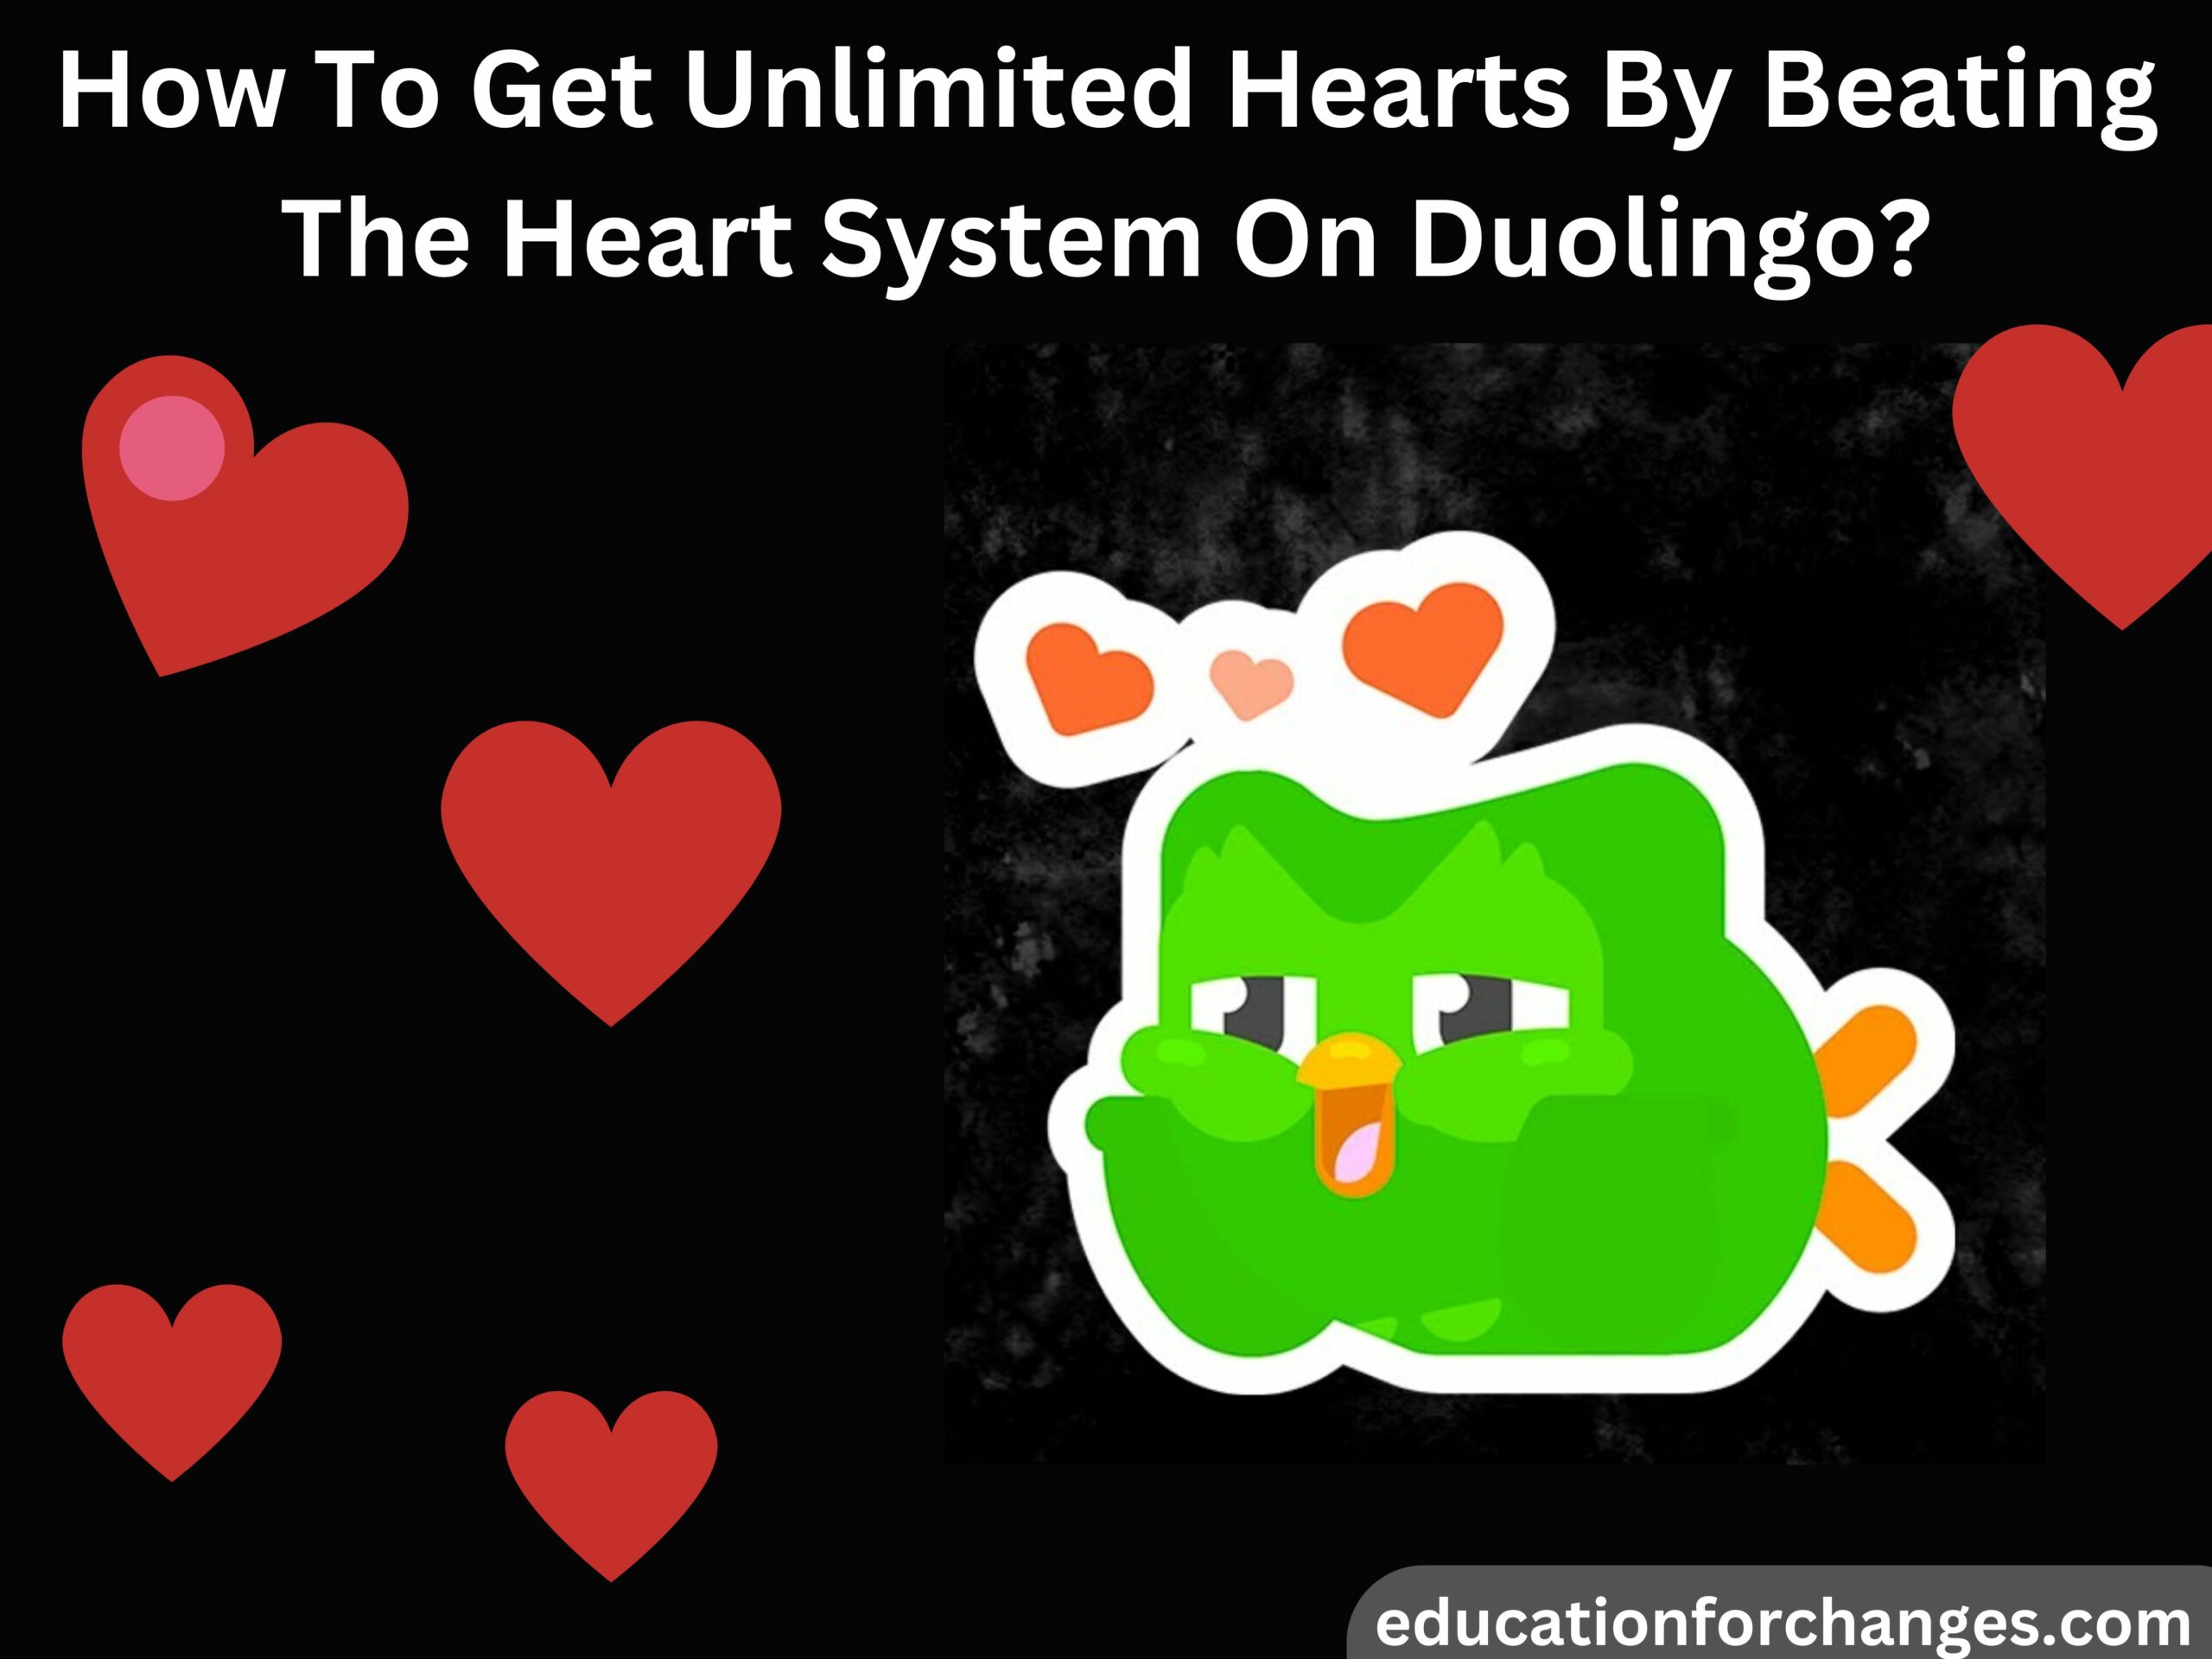 How To Get Unlimited Hearts By Beating The Heart System On Duolingo?